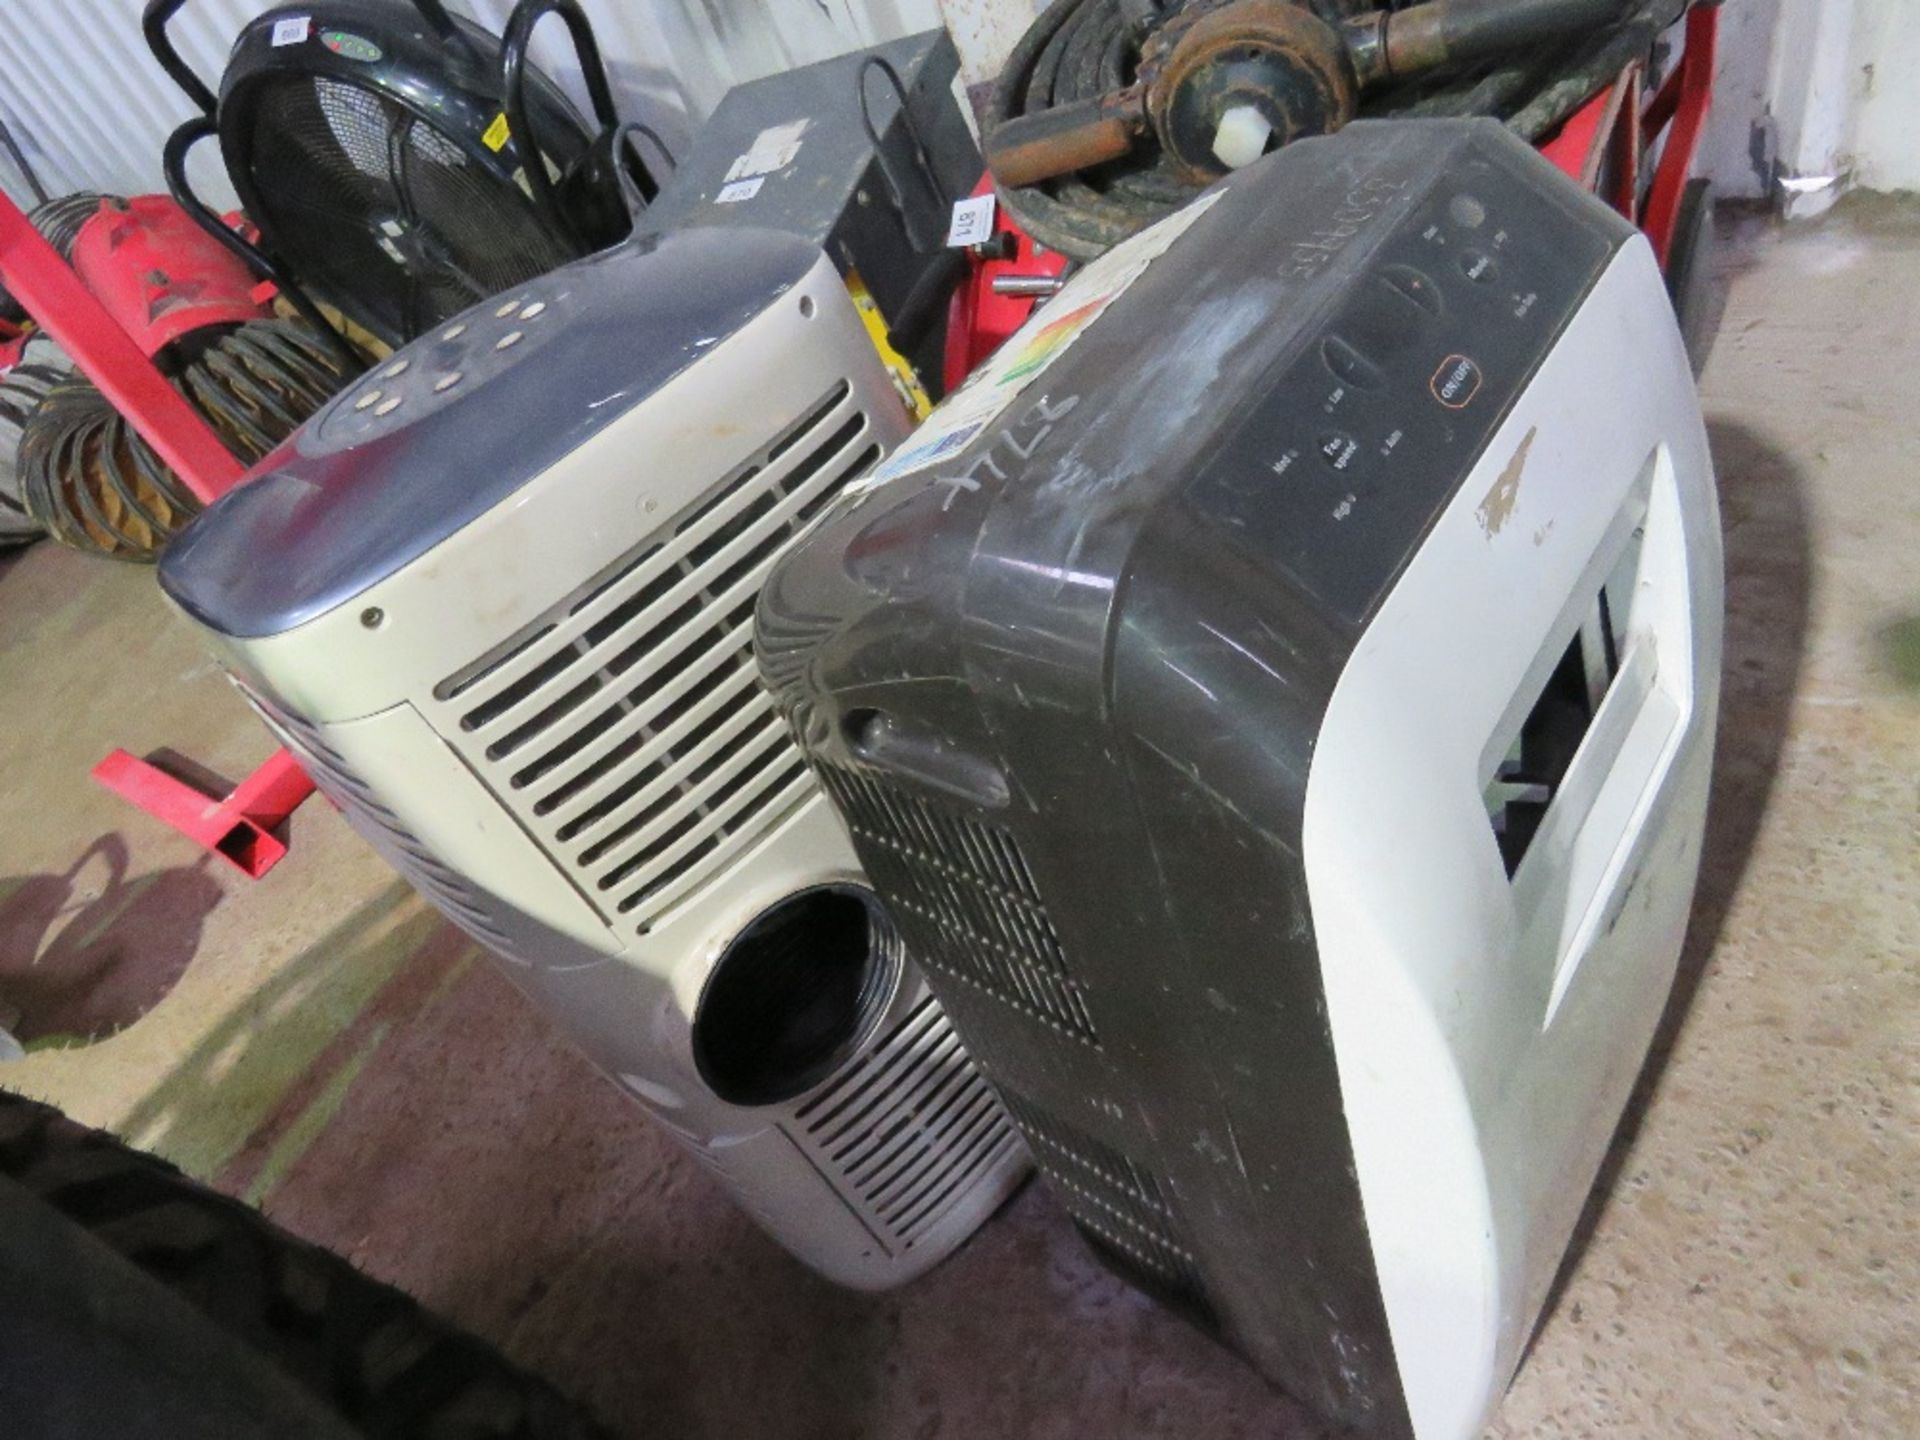 2 X ROOM AIR CONDITIONERS, 240VOLT POWERED. - Image 2 of 4